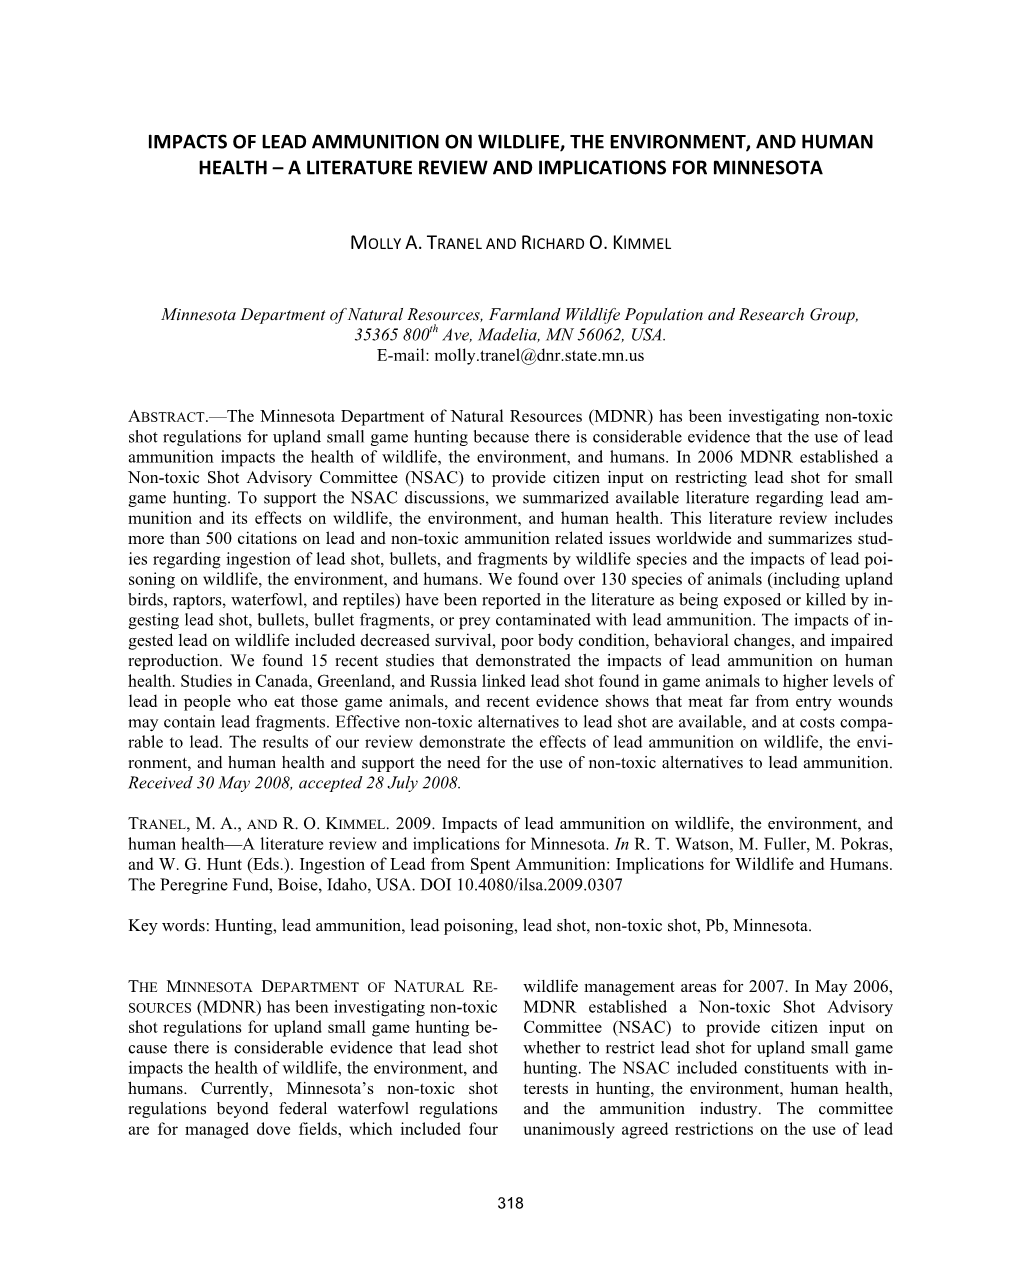 Impacts of Lead Ammunition on Wildlife, the Environment, and Human Health – a Literature Review and Implications for Minnesota